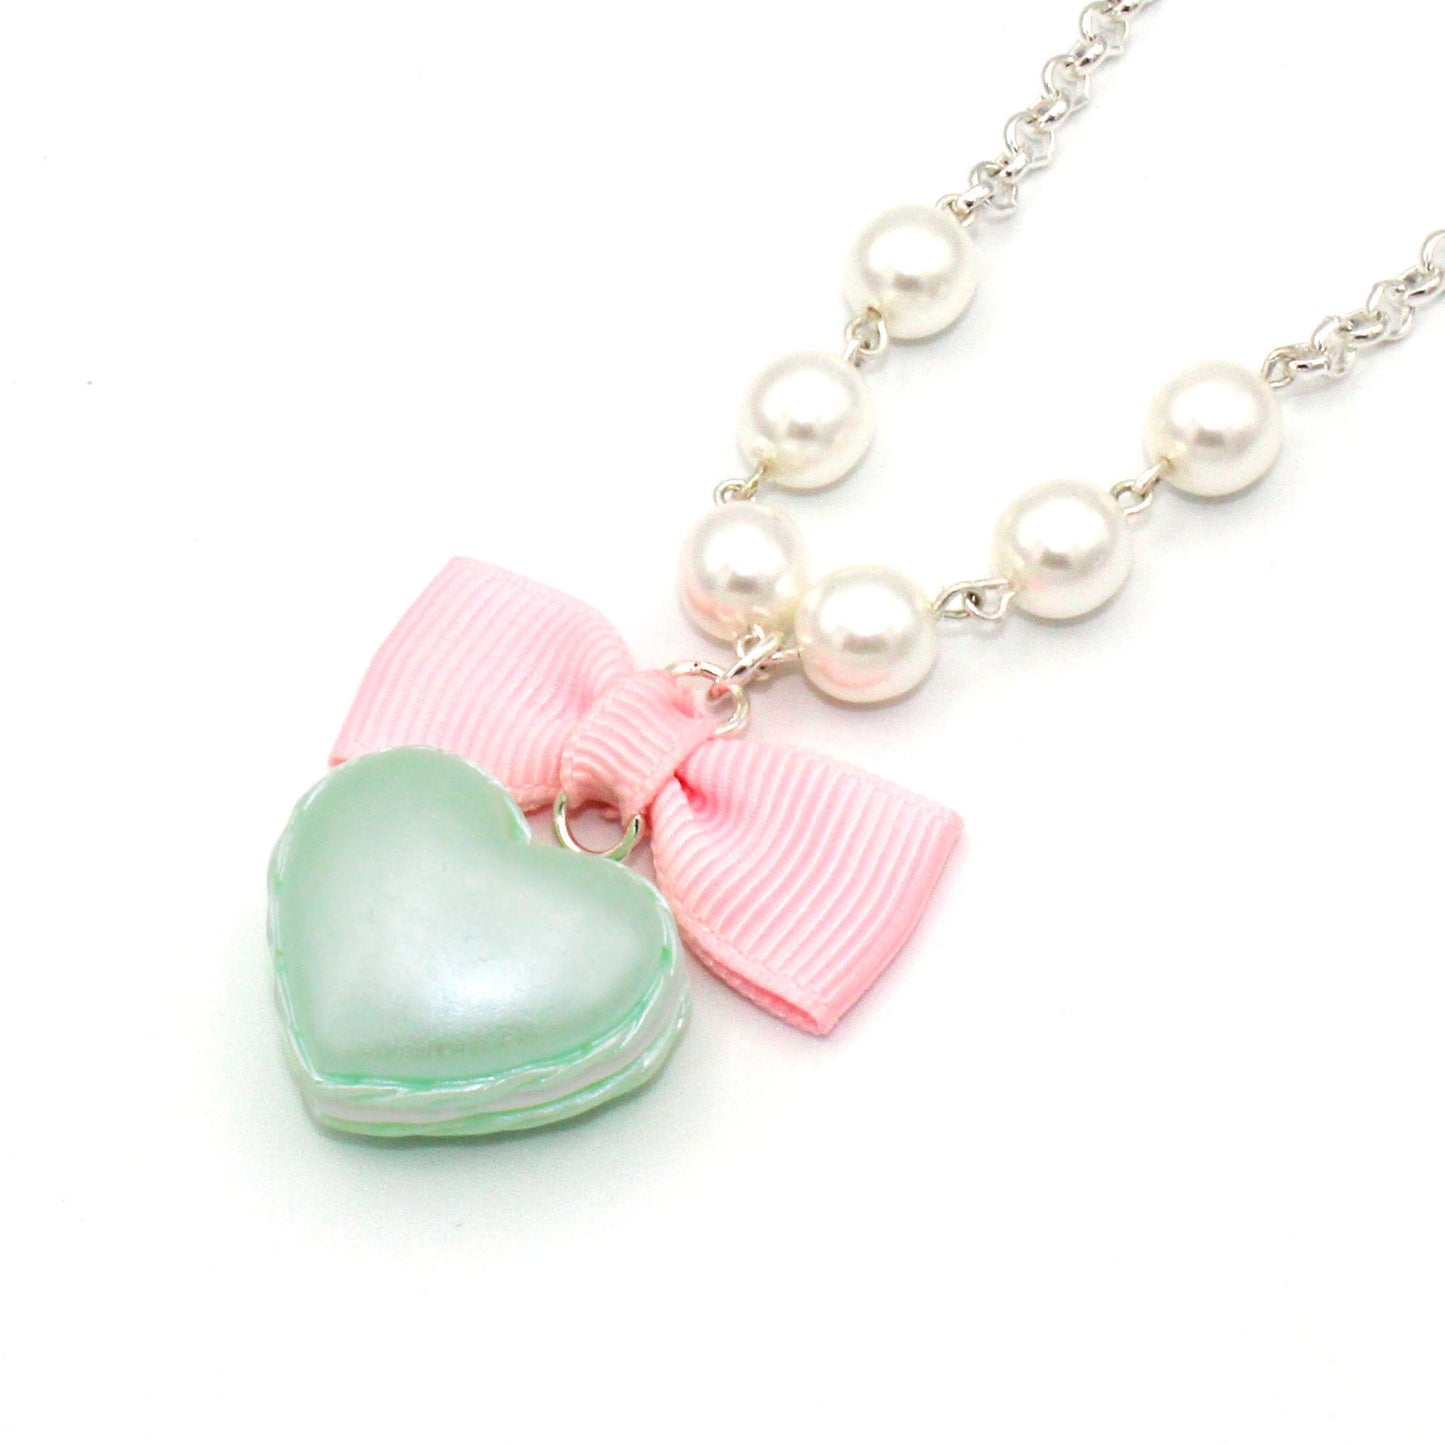 Macaron Heart Necklace - Pink, Purple or Mint Green - Valentines Day Necklace